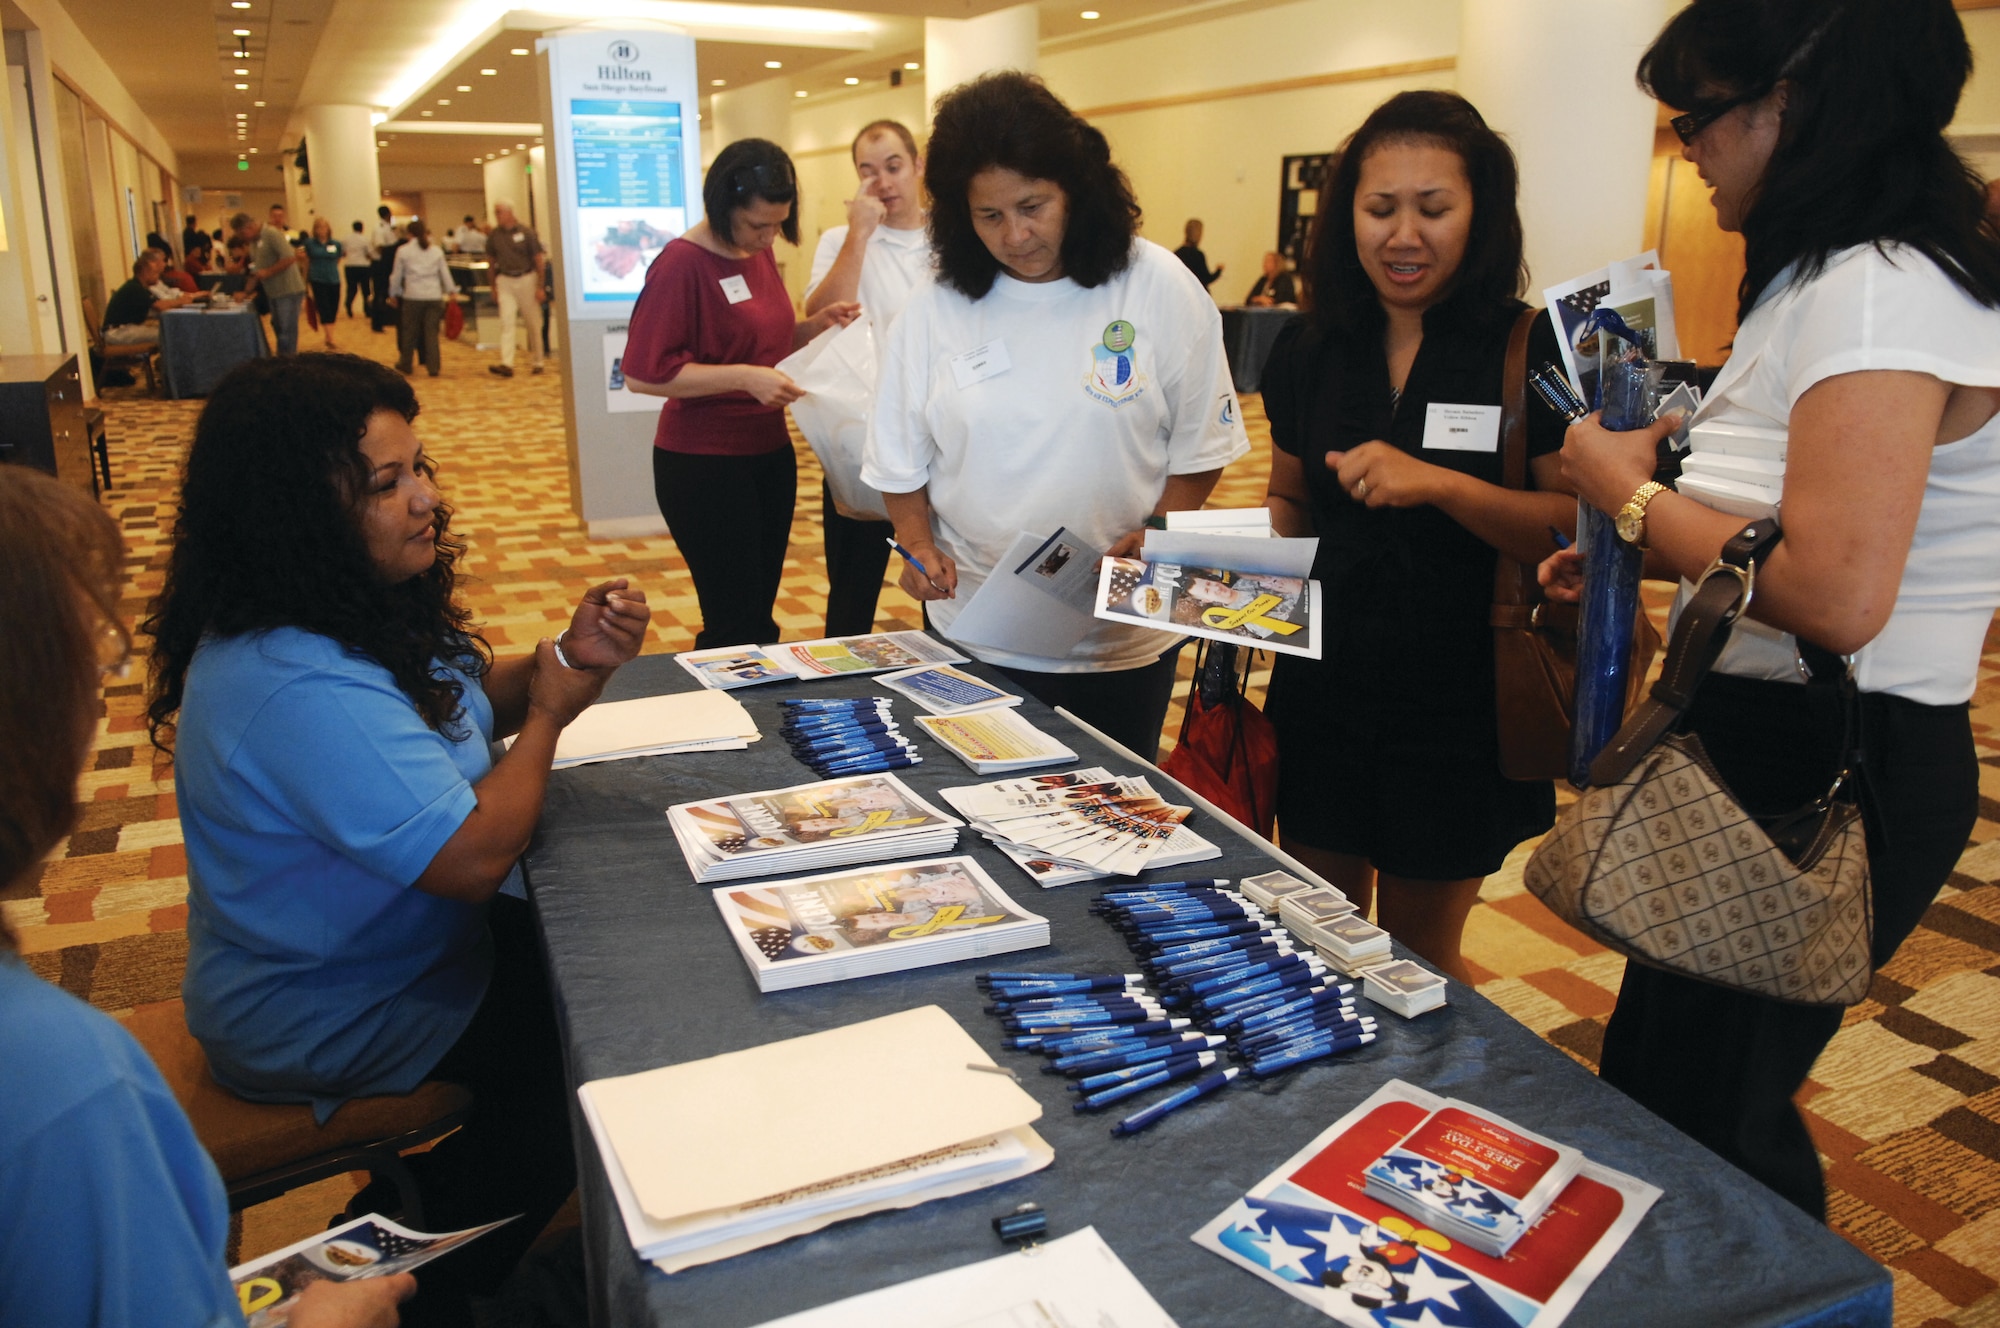 Service members and their families collect information at the 452nd Force Support Squadron booth at the Yellow Ribbon Reintegration Program held in the Hilton San Diego Bayfront hotel last weekend. Booth visitors learned about free child care during UTA weekends, complimentary tickets to SeaWorld and Disneyland and other R&R activities that the unit offers. About a dozen vendors briefed attendees on veterans’ benefits, TRICARE, The Soldiers Project, Military OneSource, Military and Family Life Consultant Program and Army Reserve Family Programs. (U.S. Air Force Photo by Tech. Sgt. Carolyn Erfe)